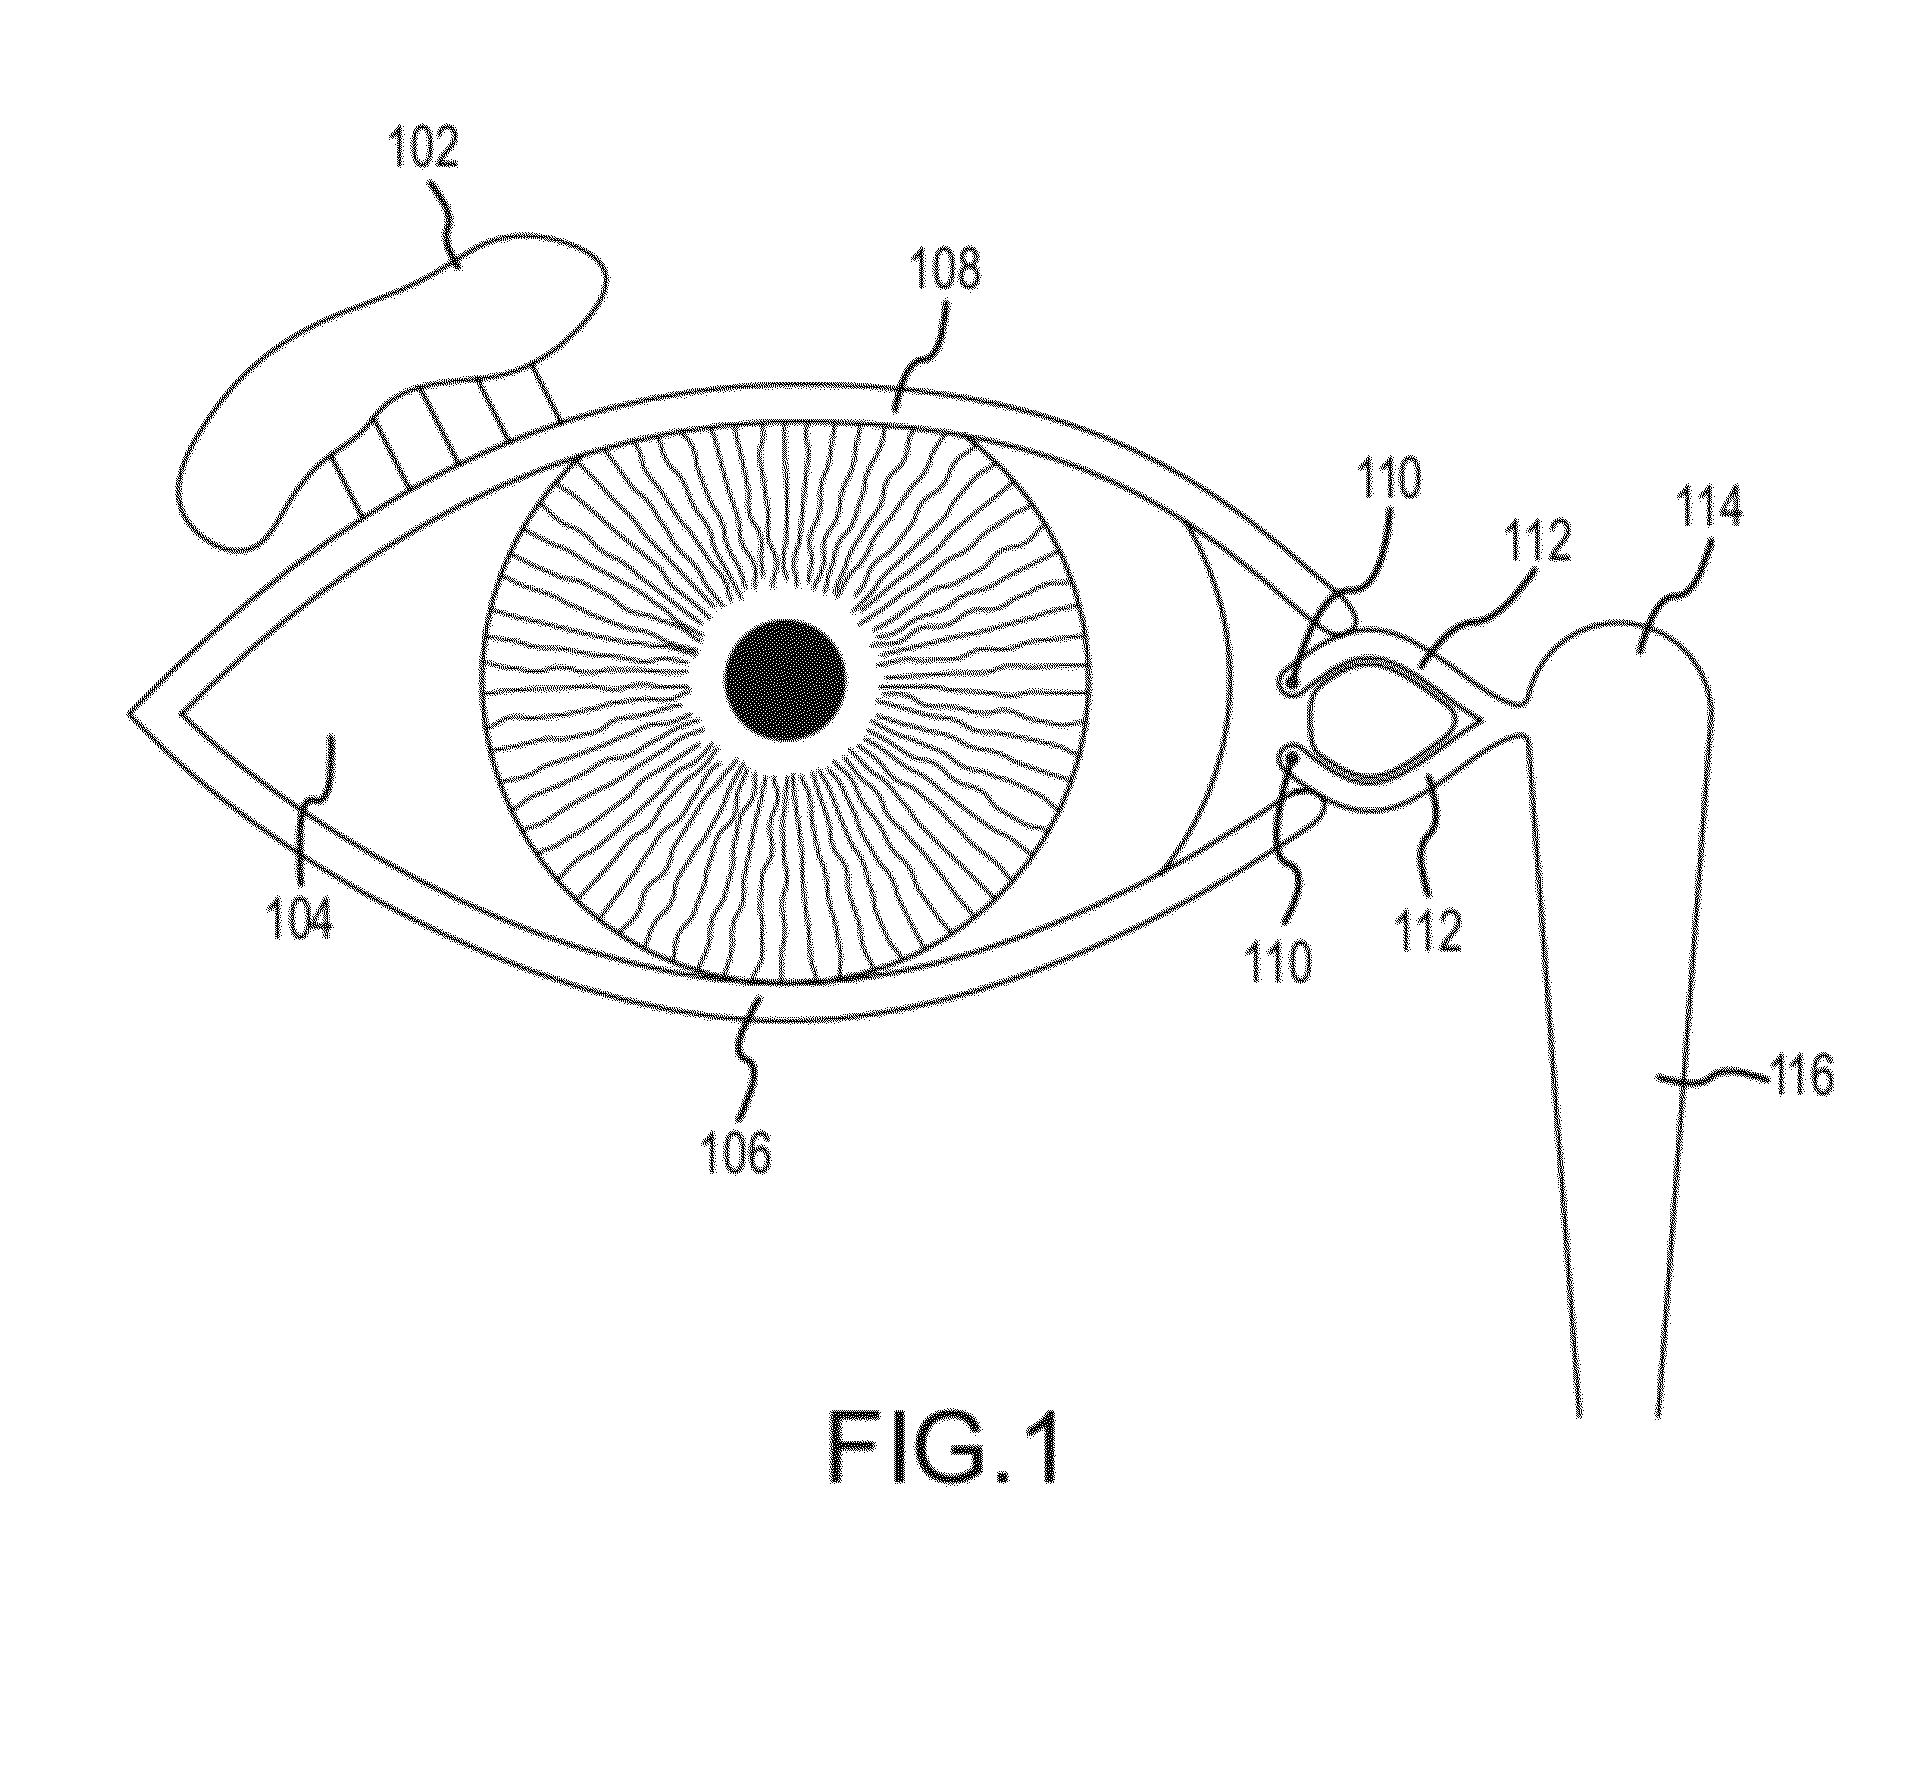 Implant device, tool, and methods relating to treatment of paranasal sinuses